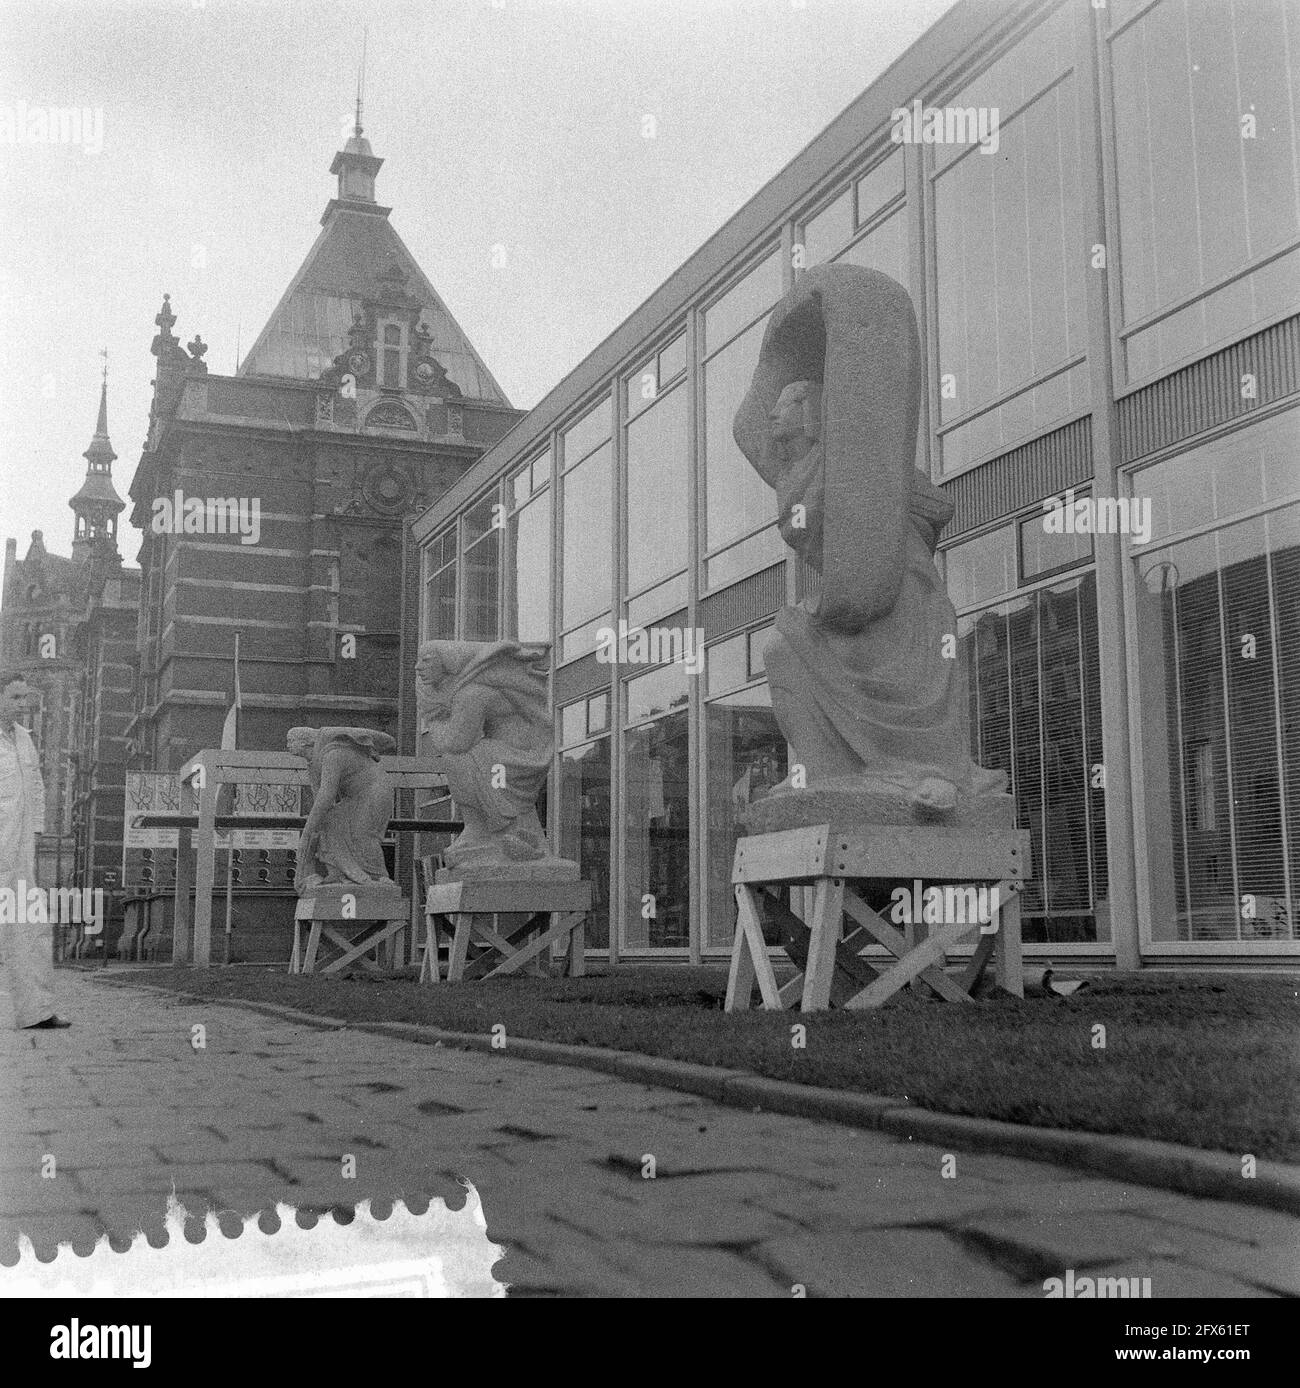 H. van Lith in front of Gemeentelijk Museum voor Philipsmonument / dark, 31 May 1957, The Netherlands, 20th century press agency photo, news to remember, documentary, historic photography 1945-1990, visual stories, human history of the Twentieth Century, capturing moments in time Stock Photo